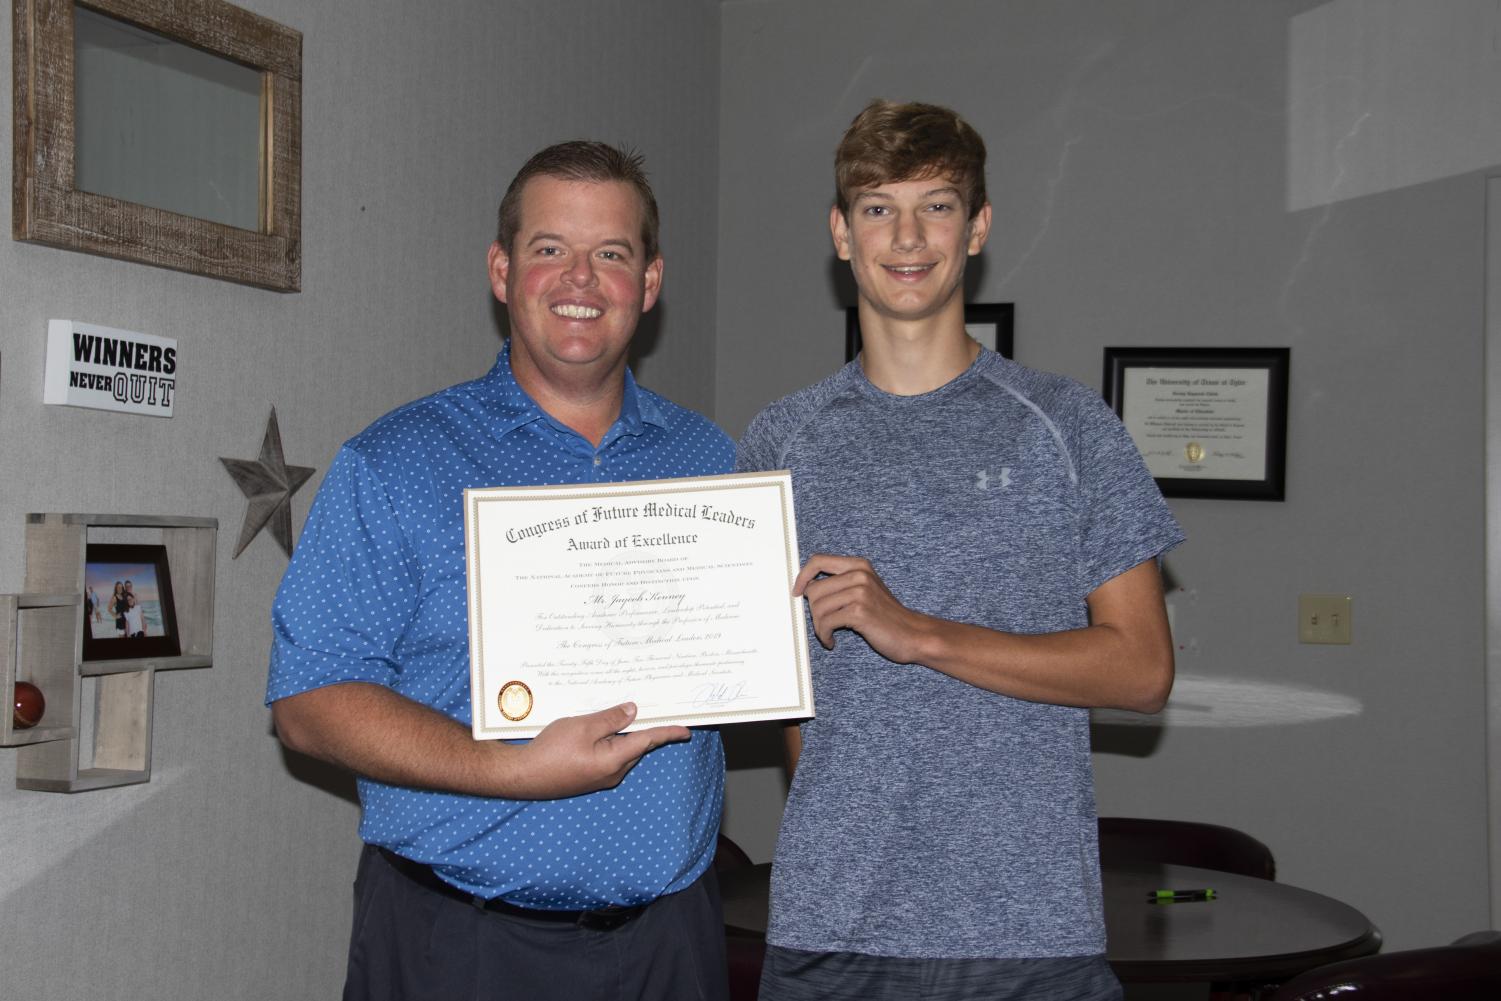 Junior Jaycob Kenney receives an award for his attendance at the Congress of Future Medical Leaders. Kenney was chosen to represent the State of Texas at the national congress